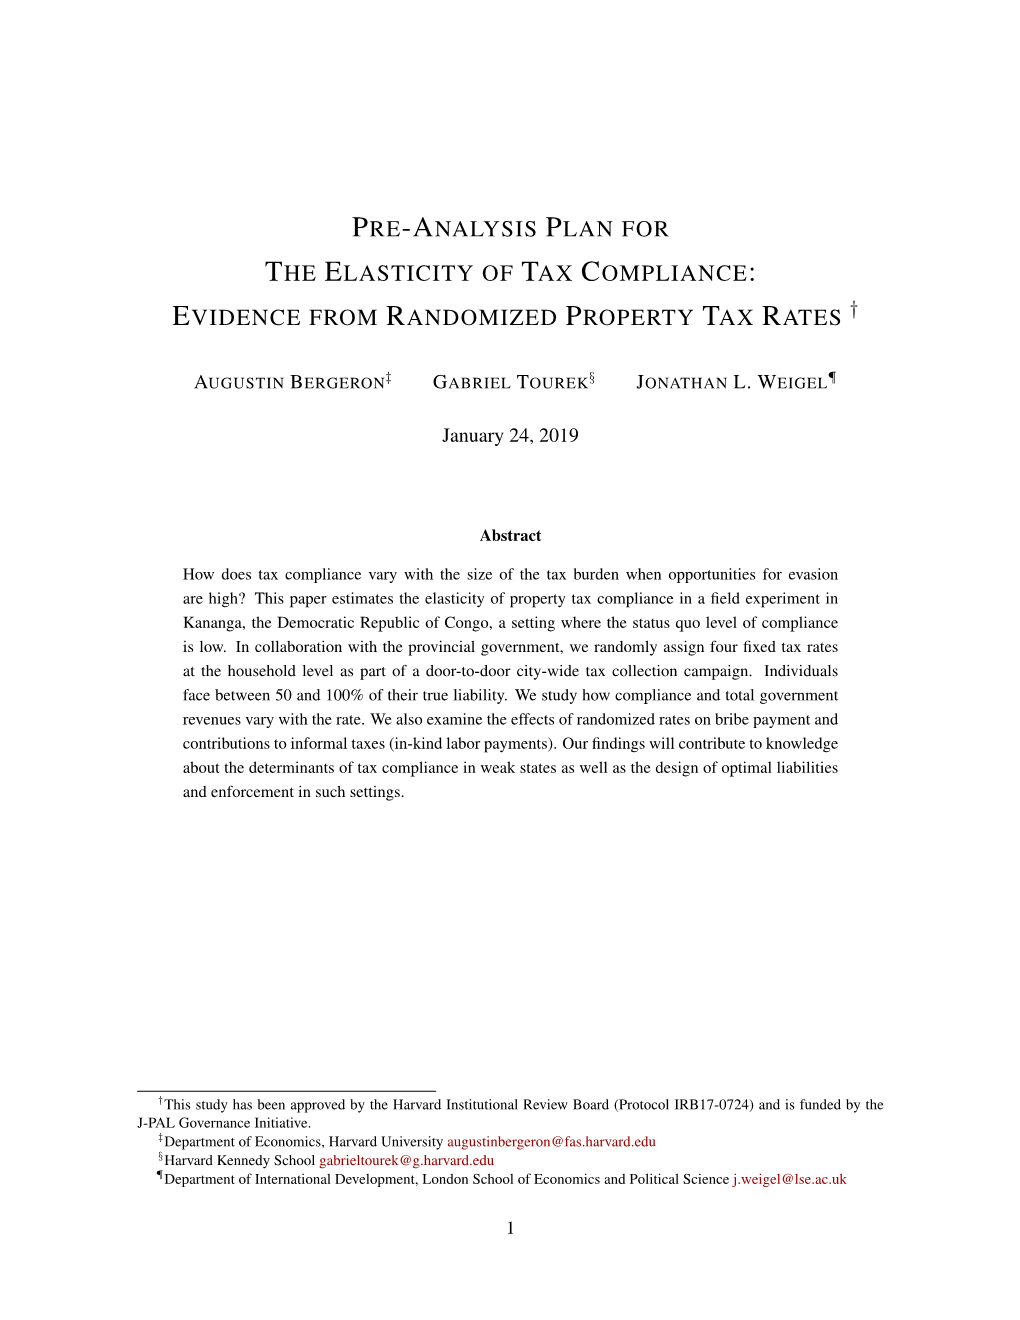 Pre-Analysis Plan for the Elasticity of Tax Compliance